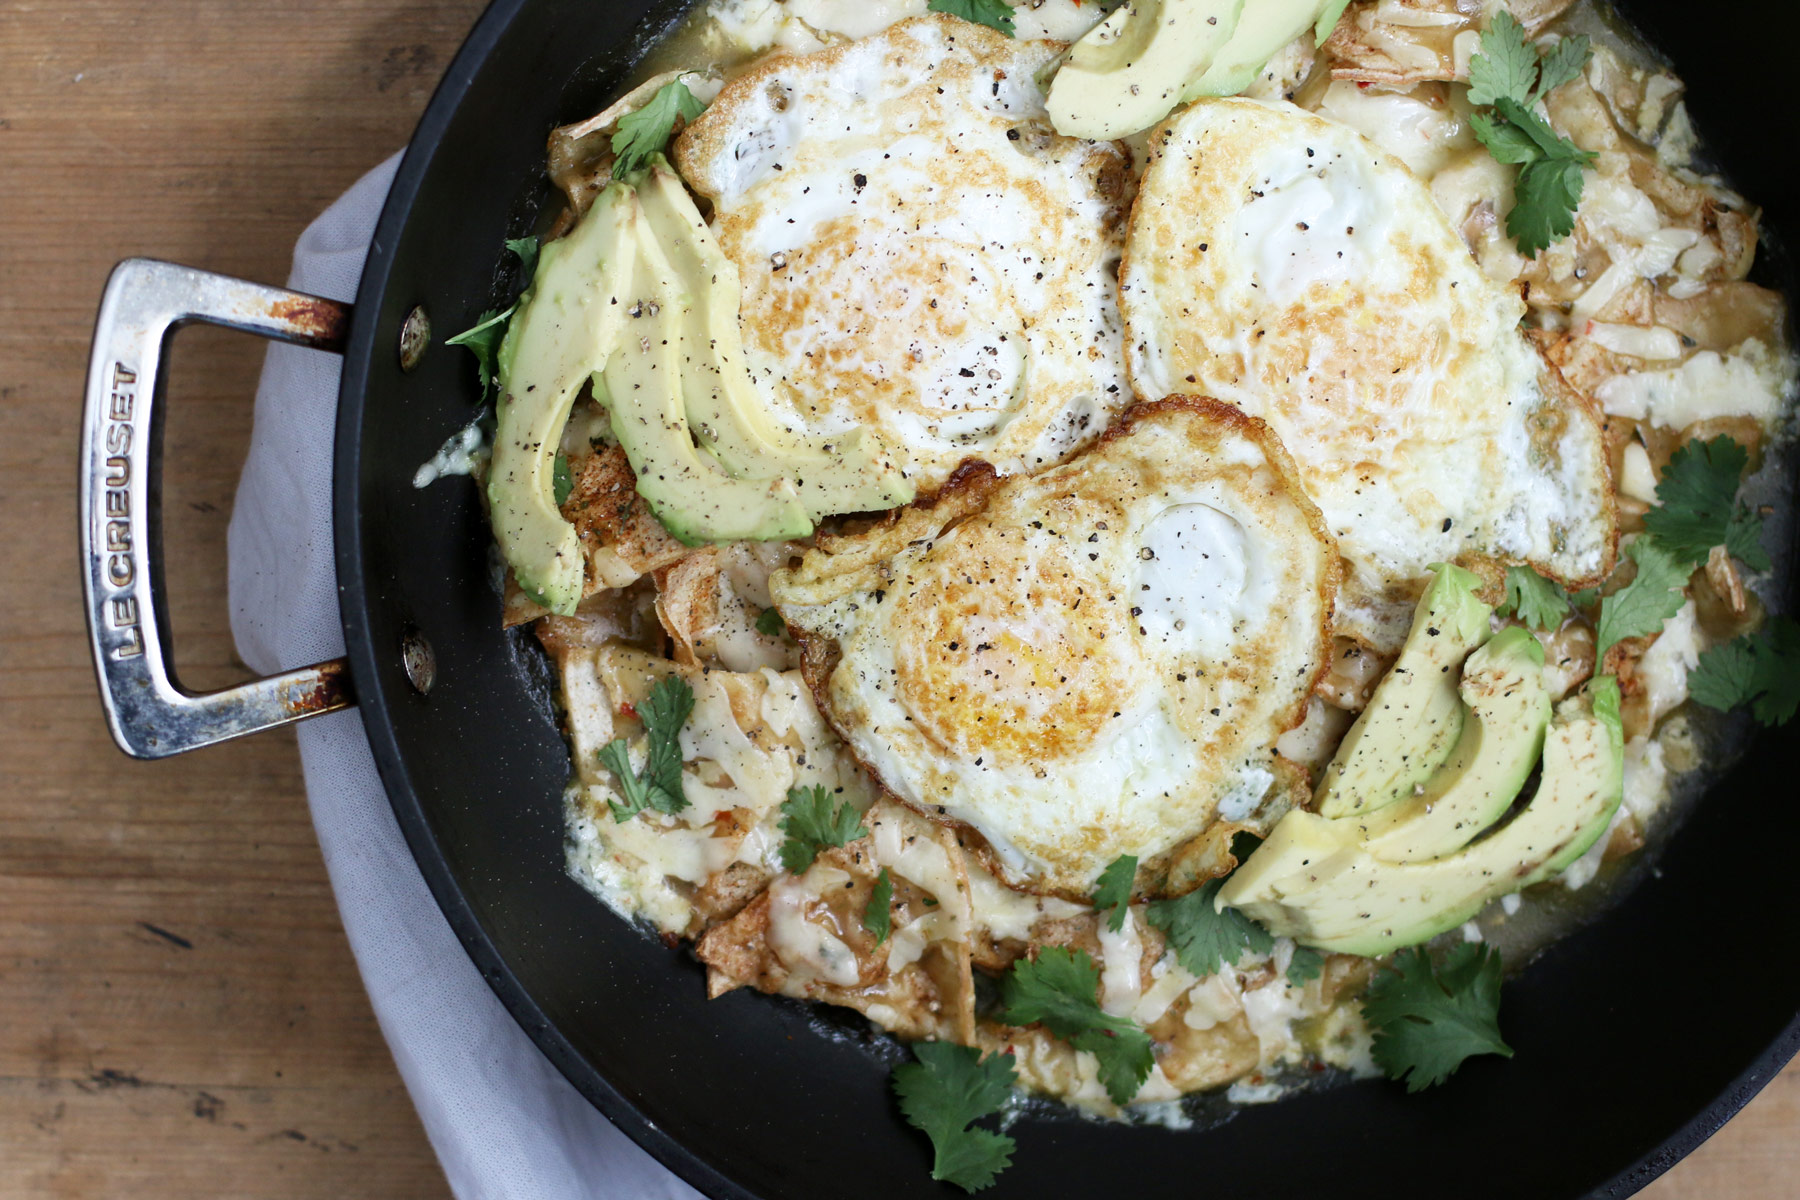 Chilaquiles recipe by Orson Gygi